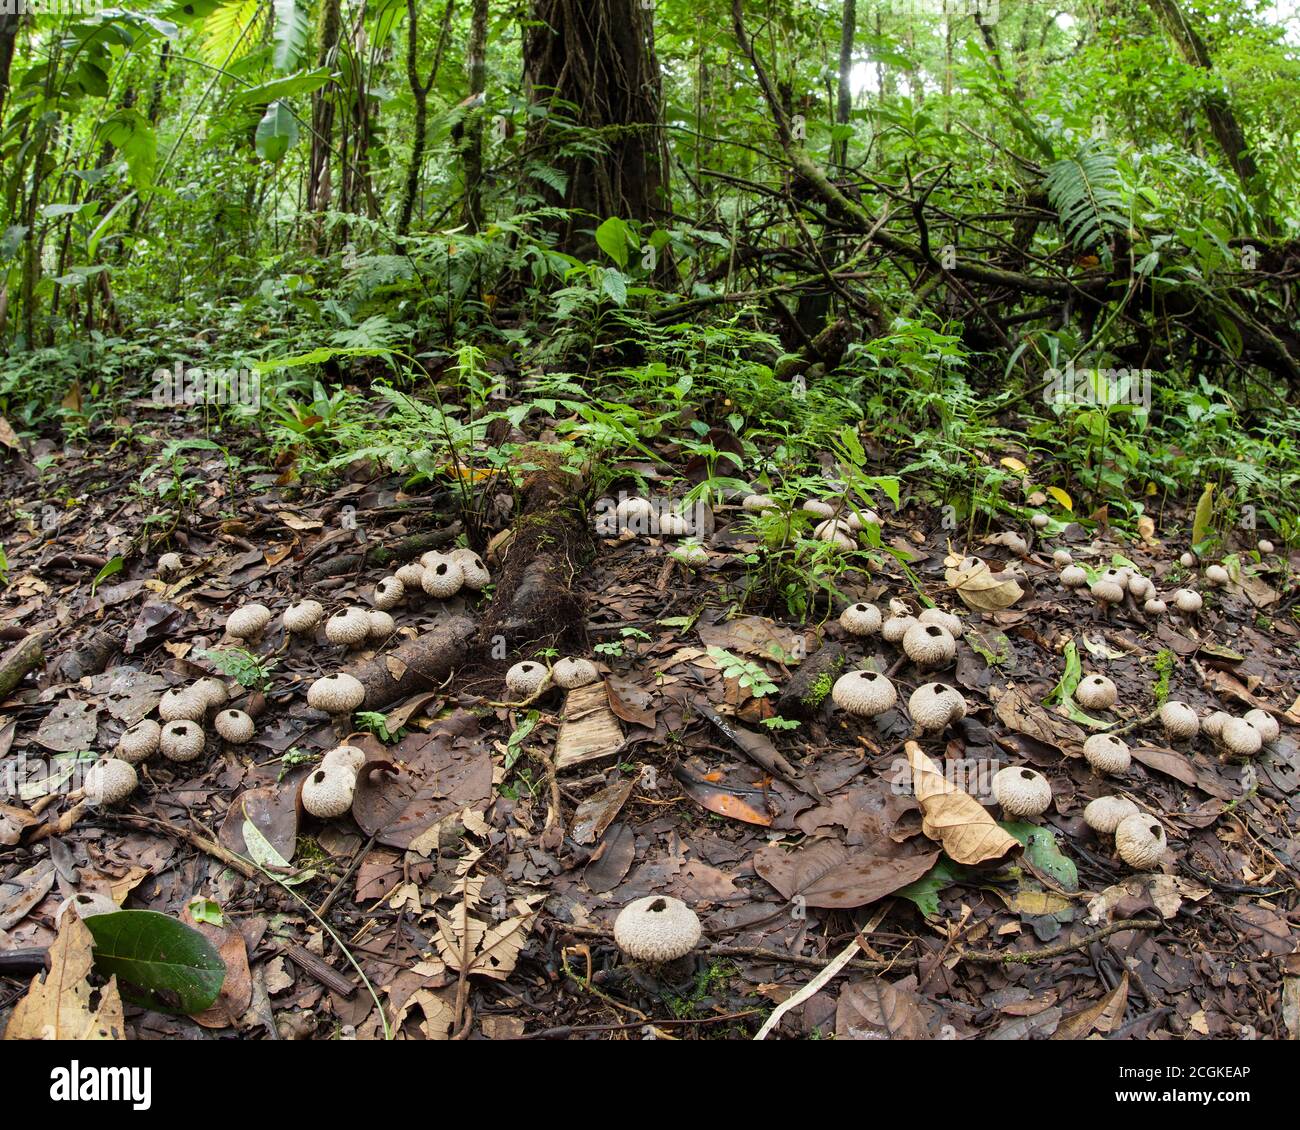 Puffball mushrooms cover the forest floor in the humid rainforest of Costa Rica.  These puffballs have already expelled their spores. Stock Photo